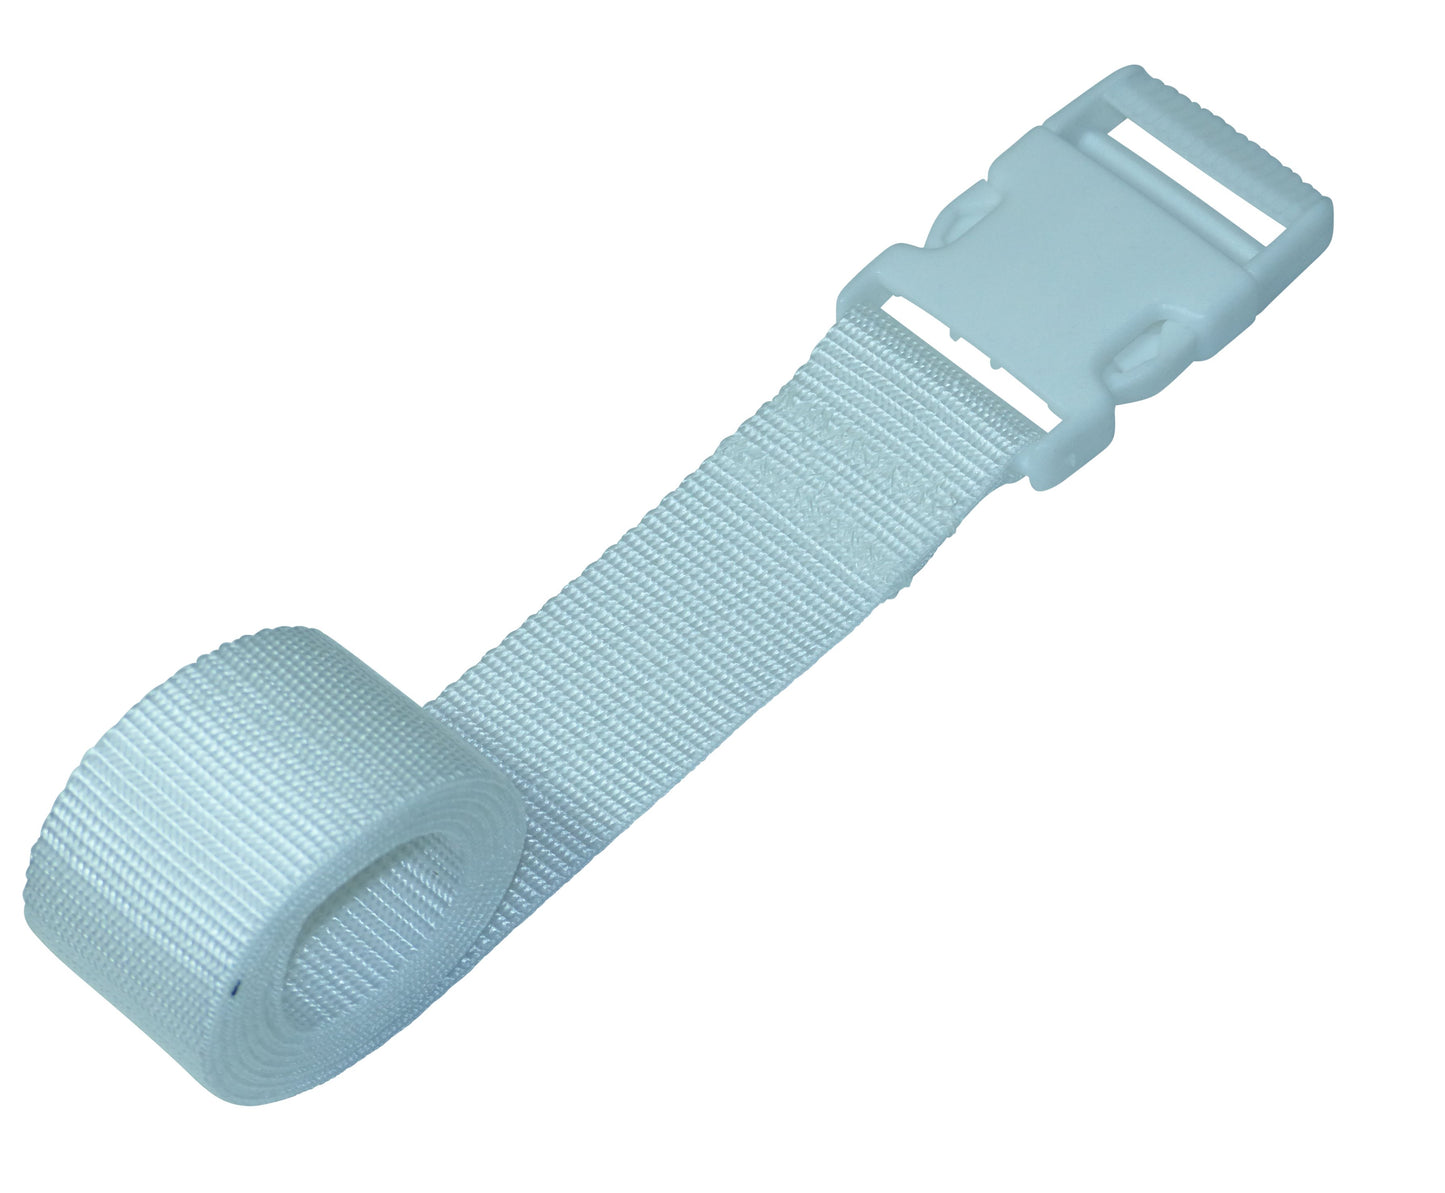 Benristraps 38mm Webbing Strap with Quick Release Buckle in white